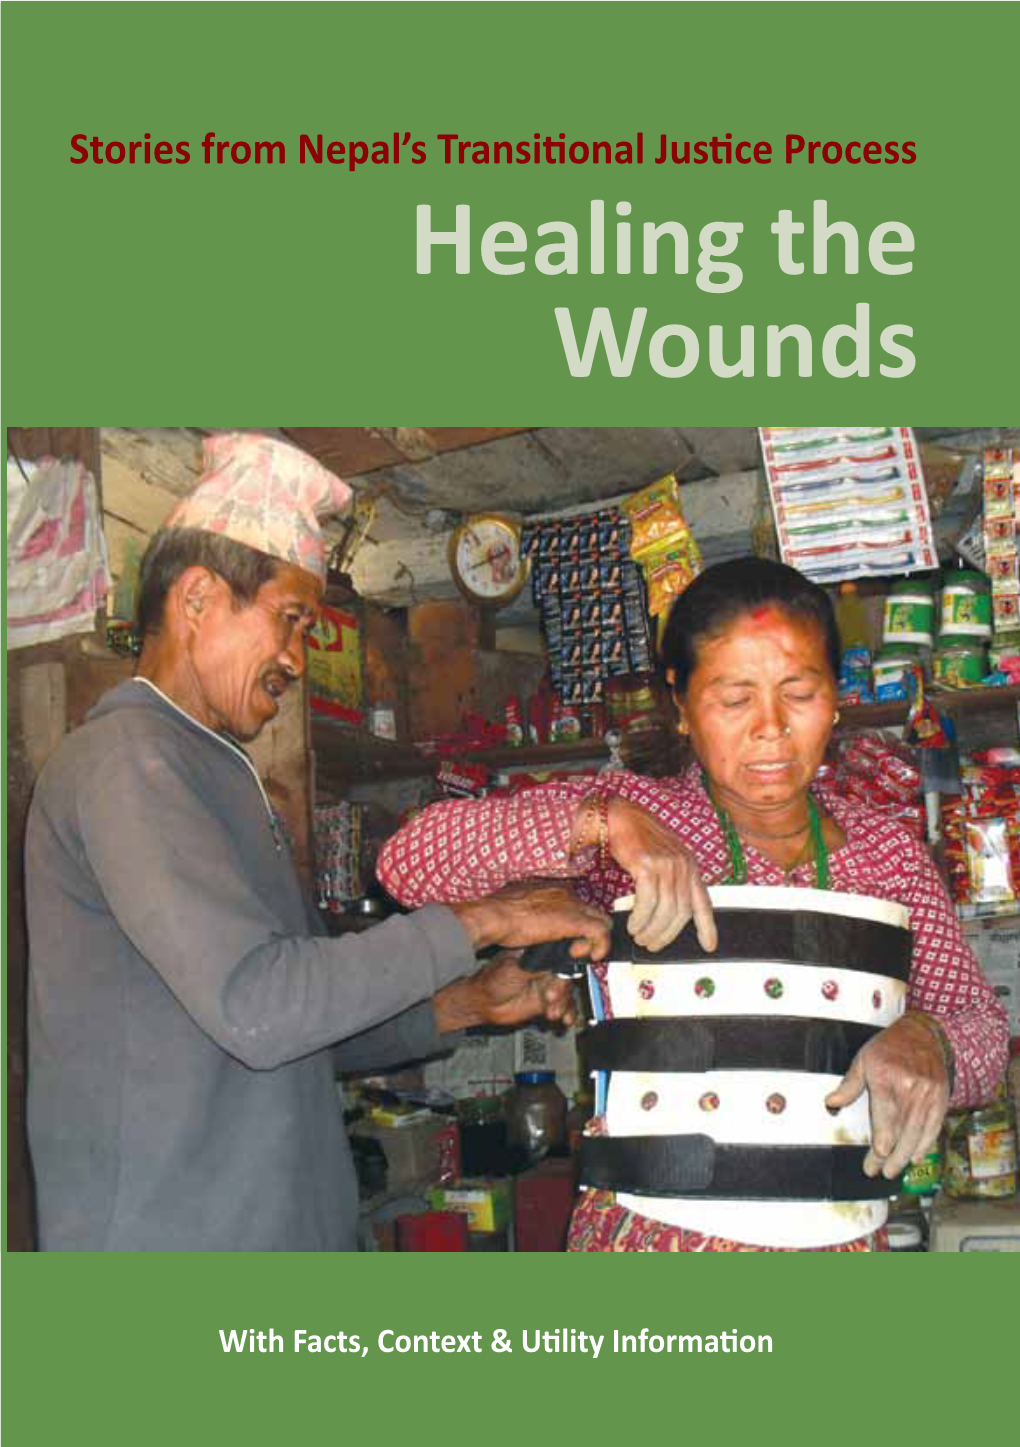 Healing the Wounds of the Most Excluded Sections of Nepali Society